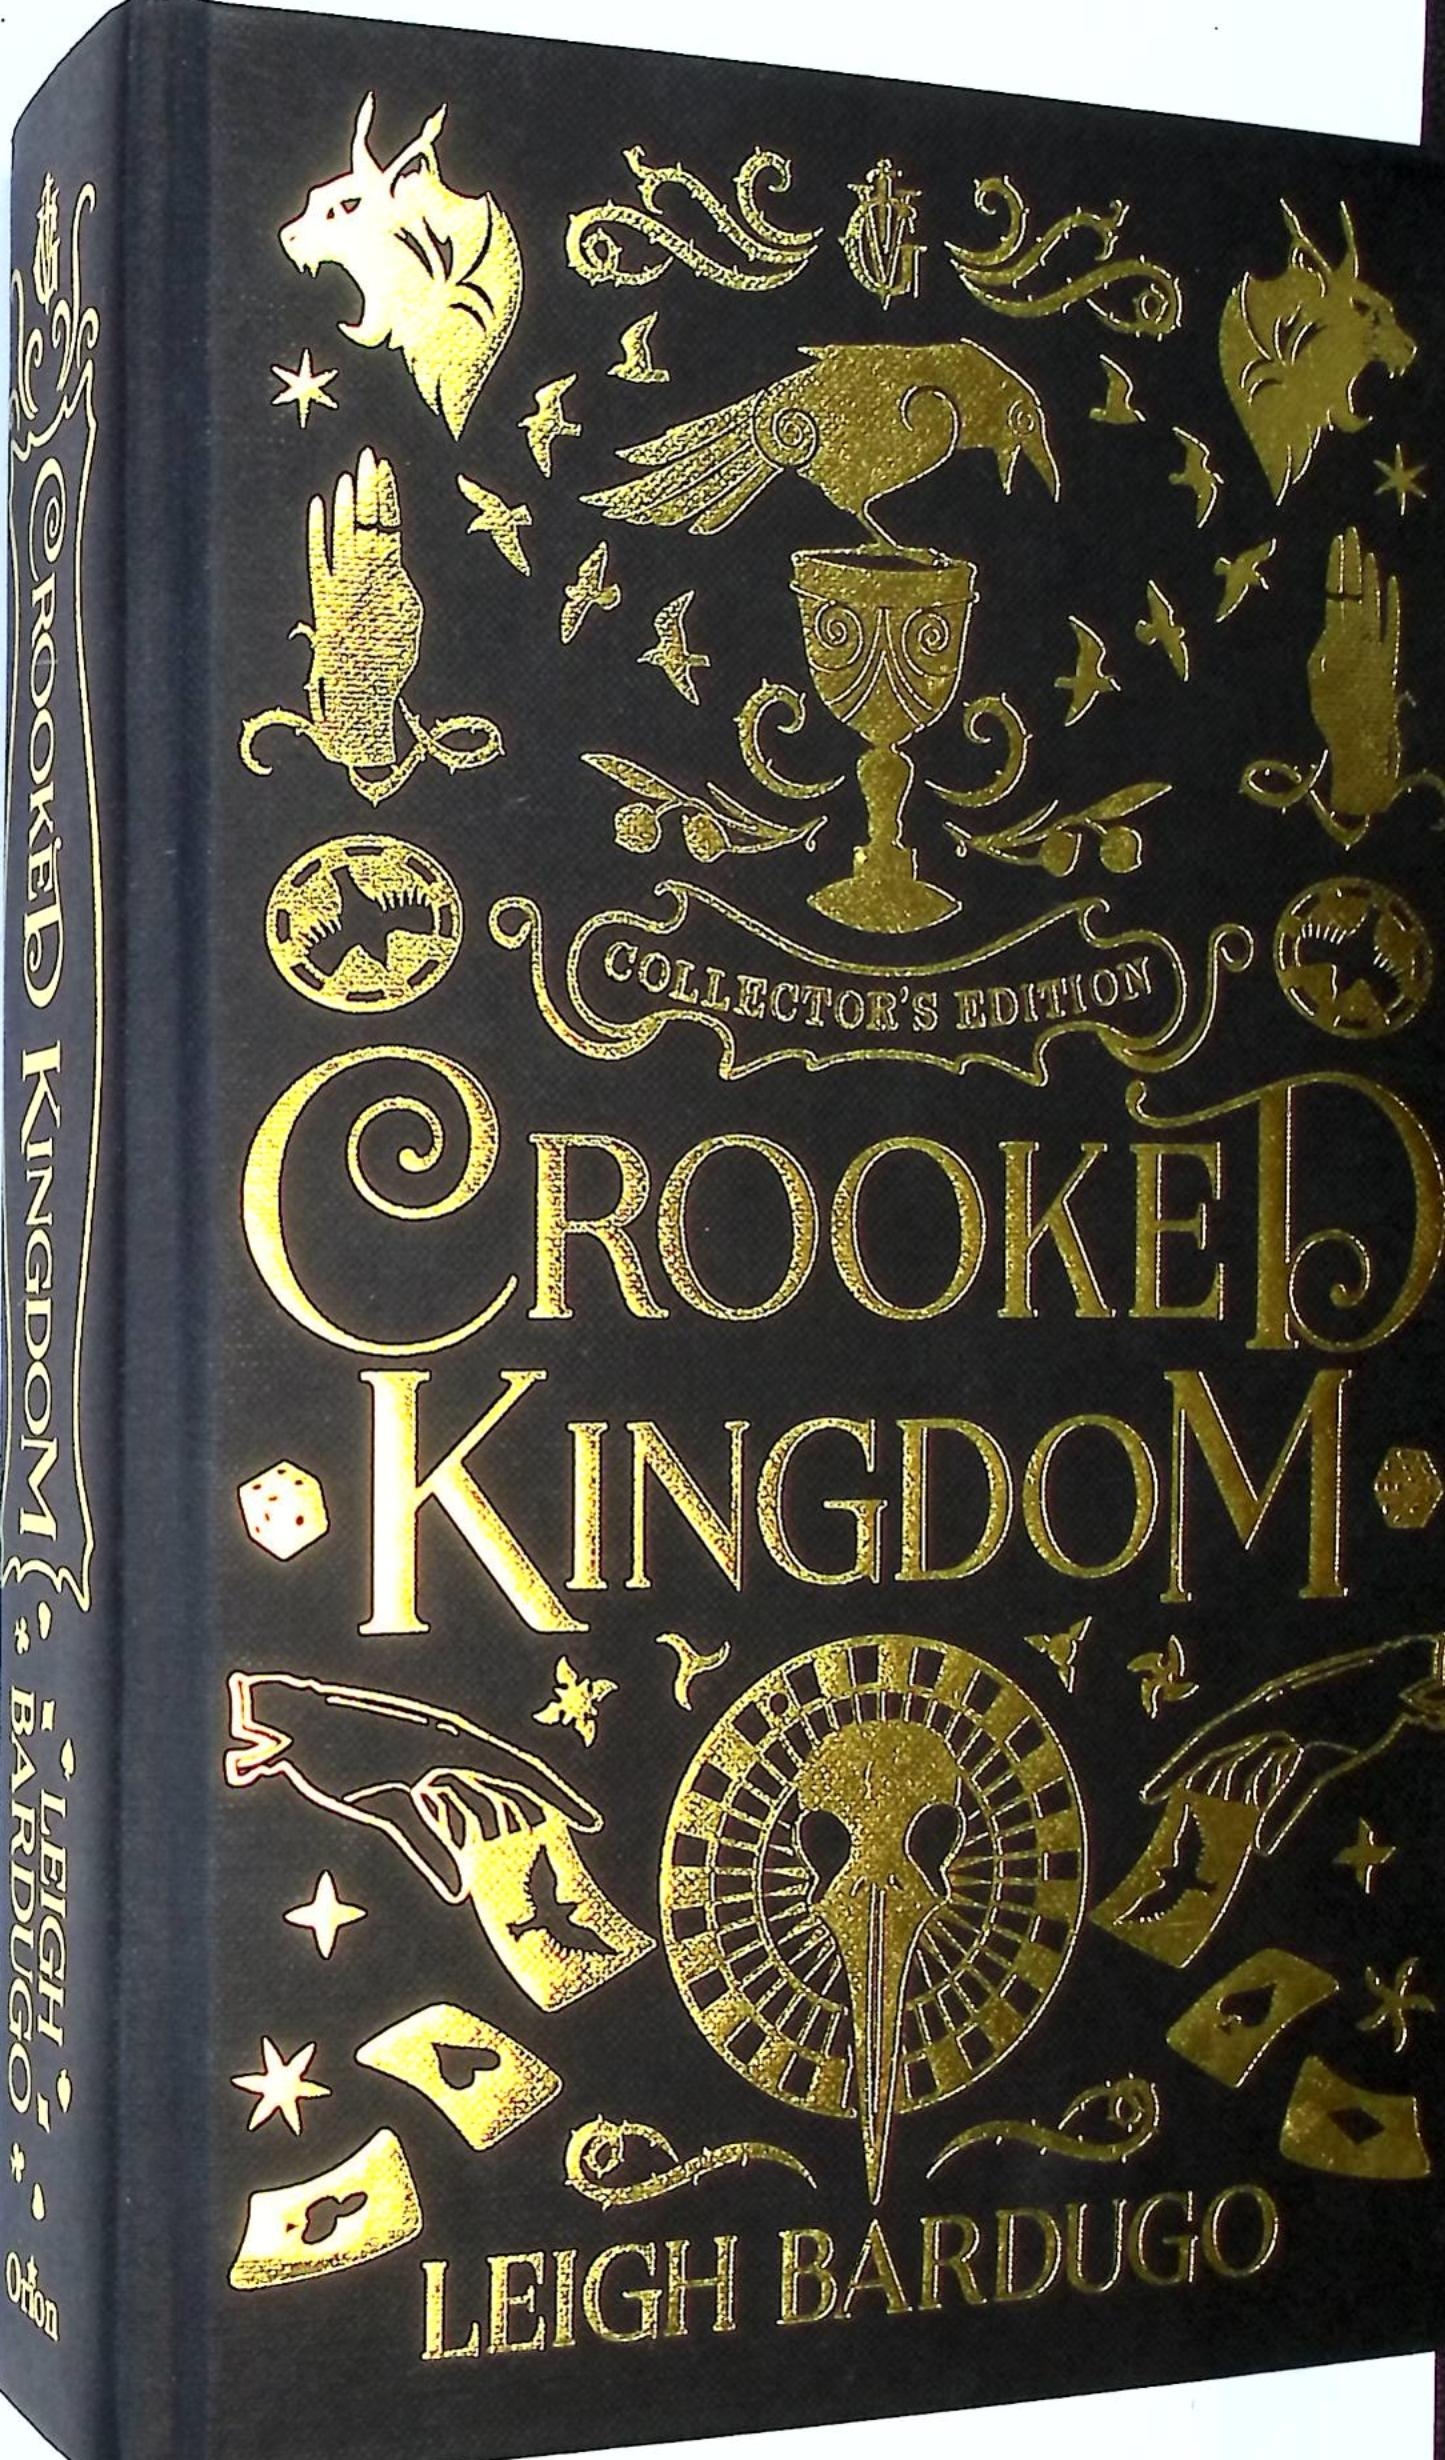 Crooked Kingdom.  Collector's edition